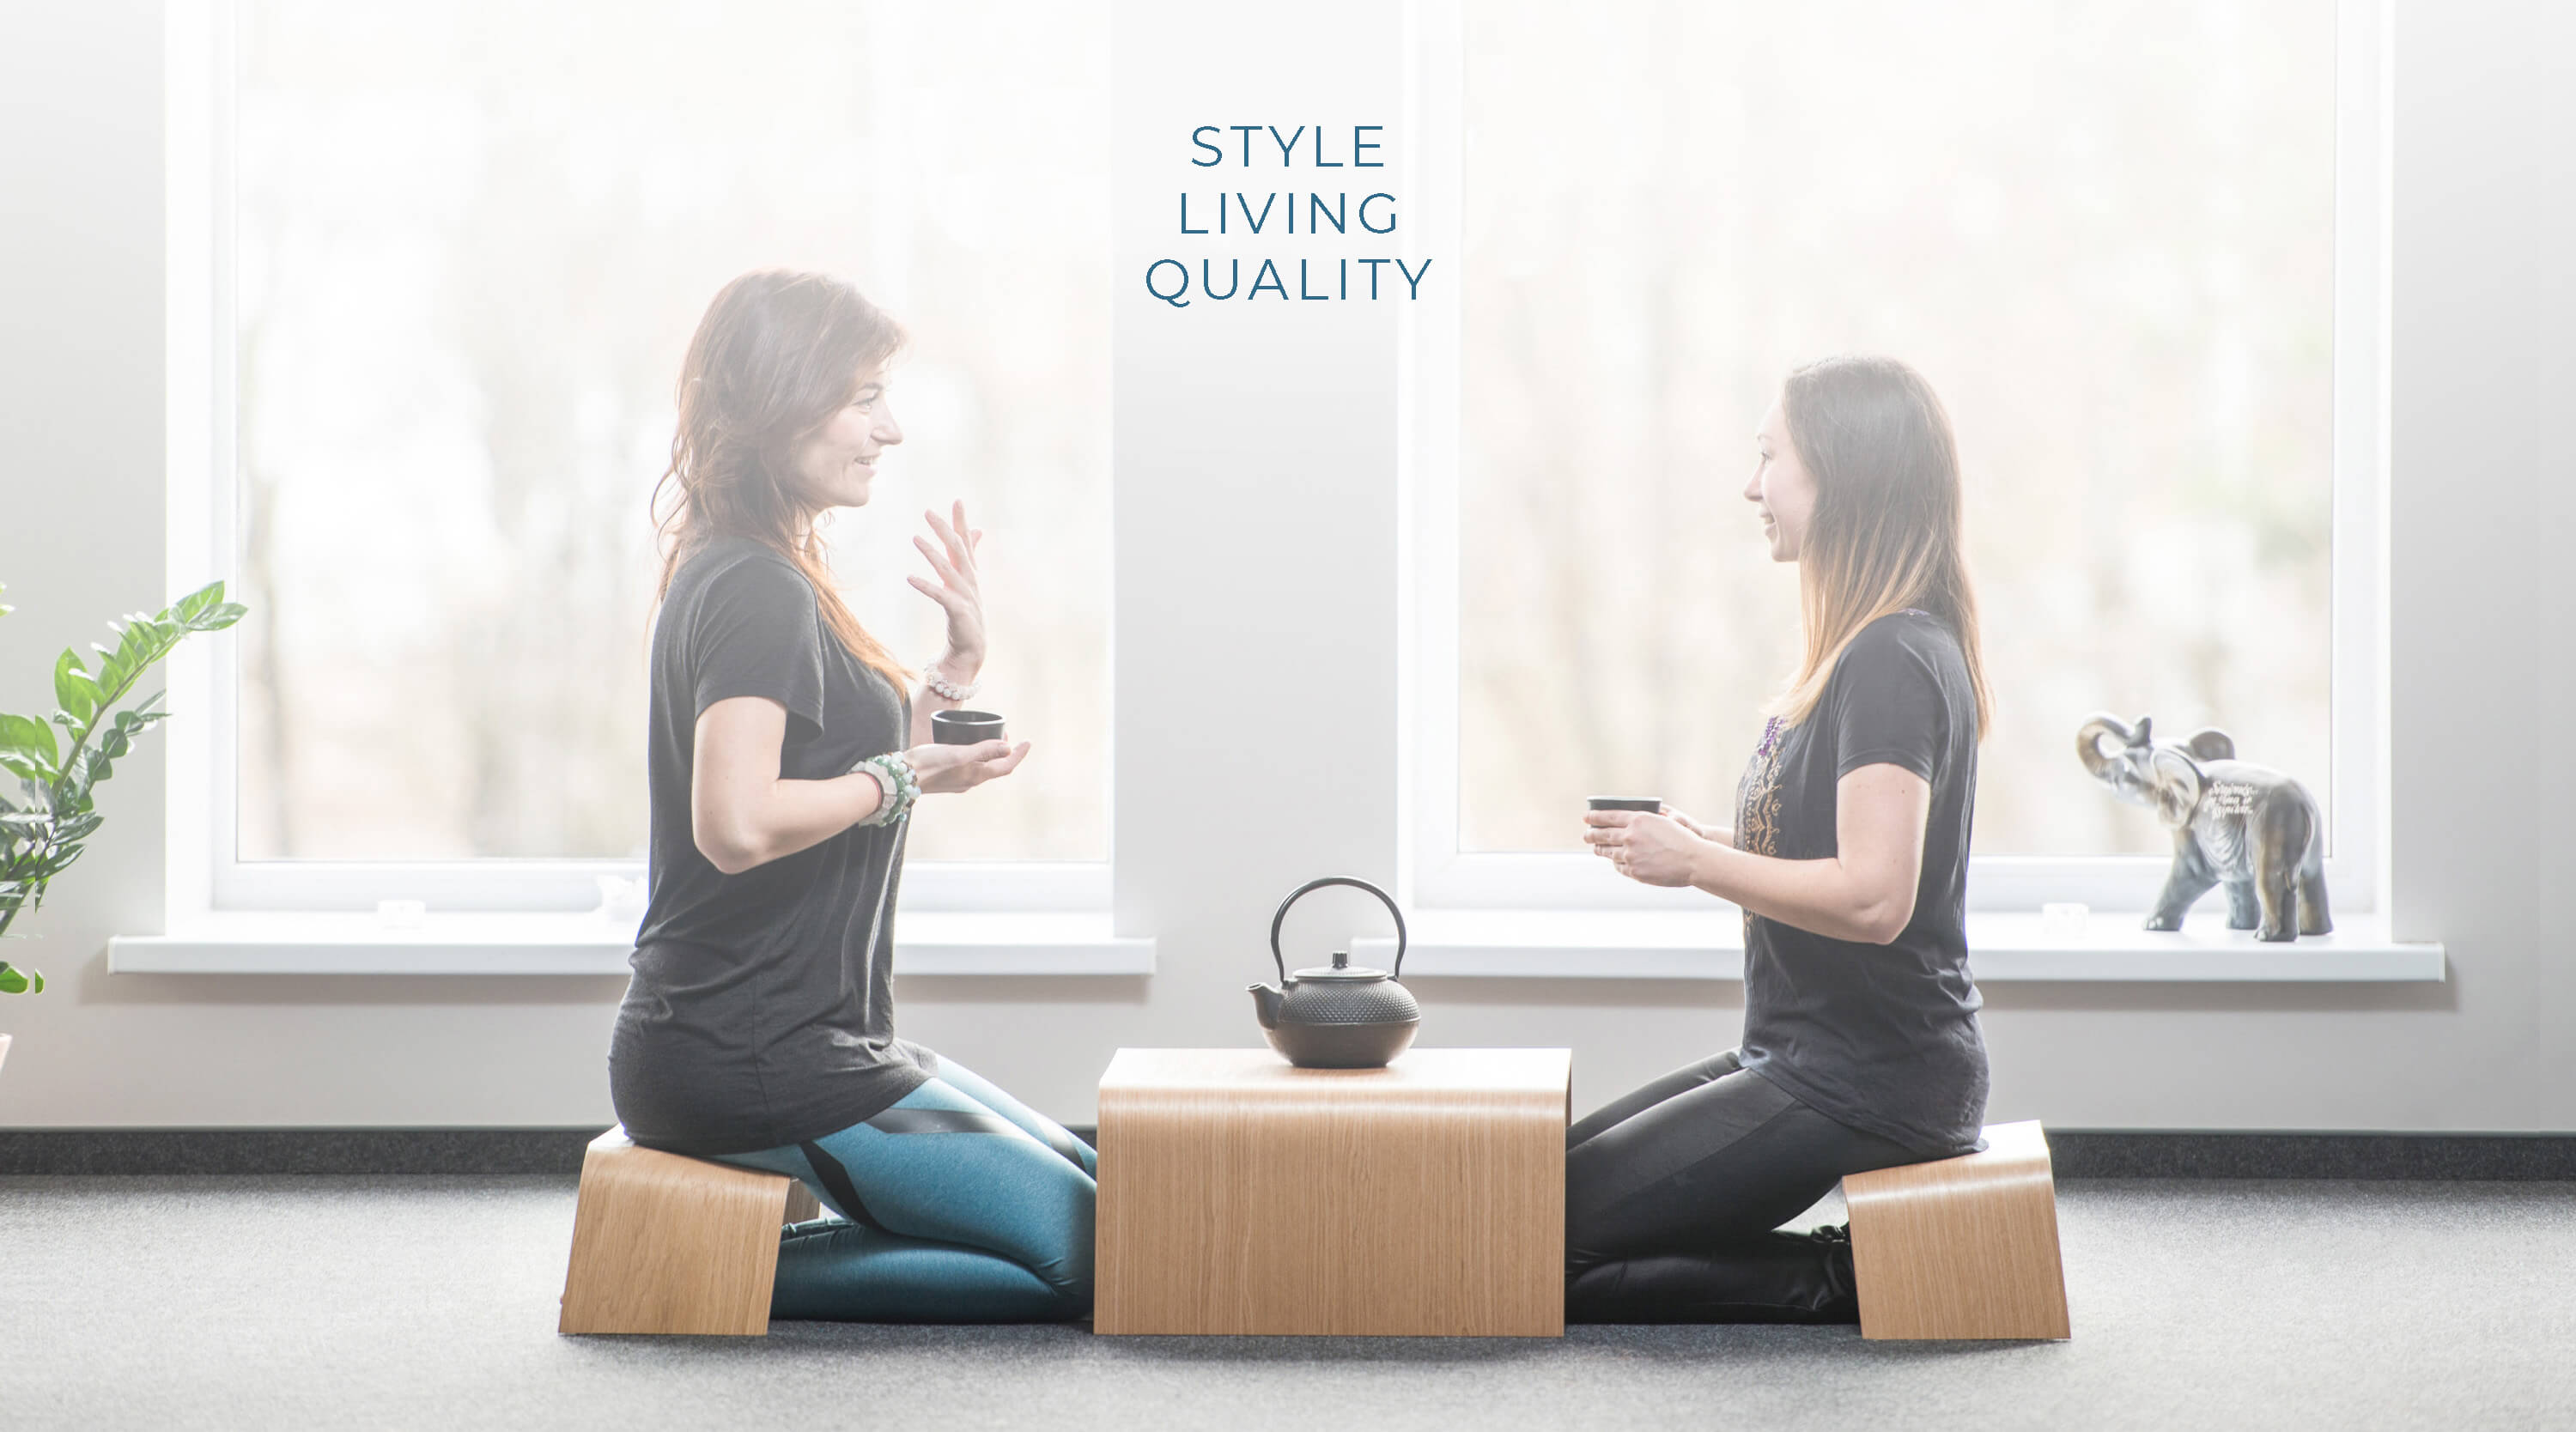 Style, living quality